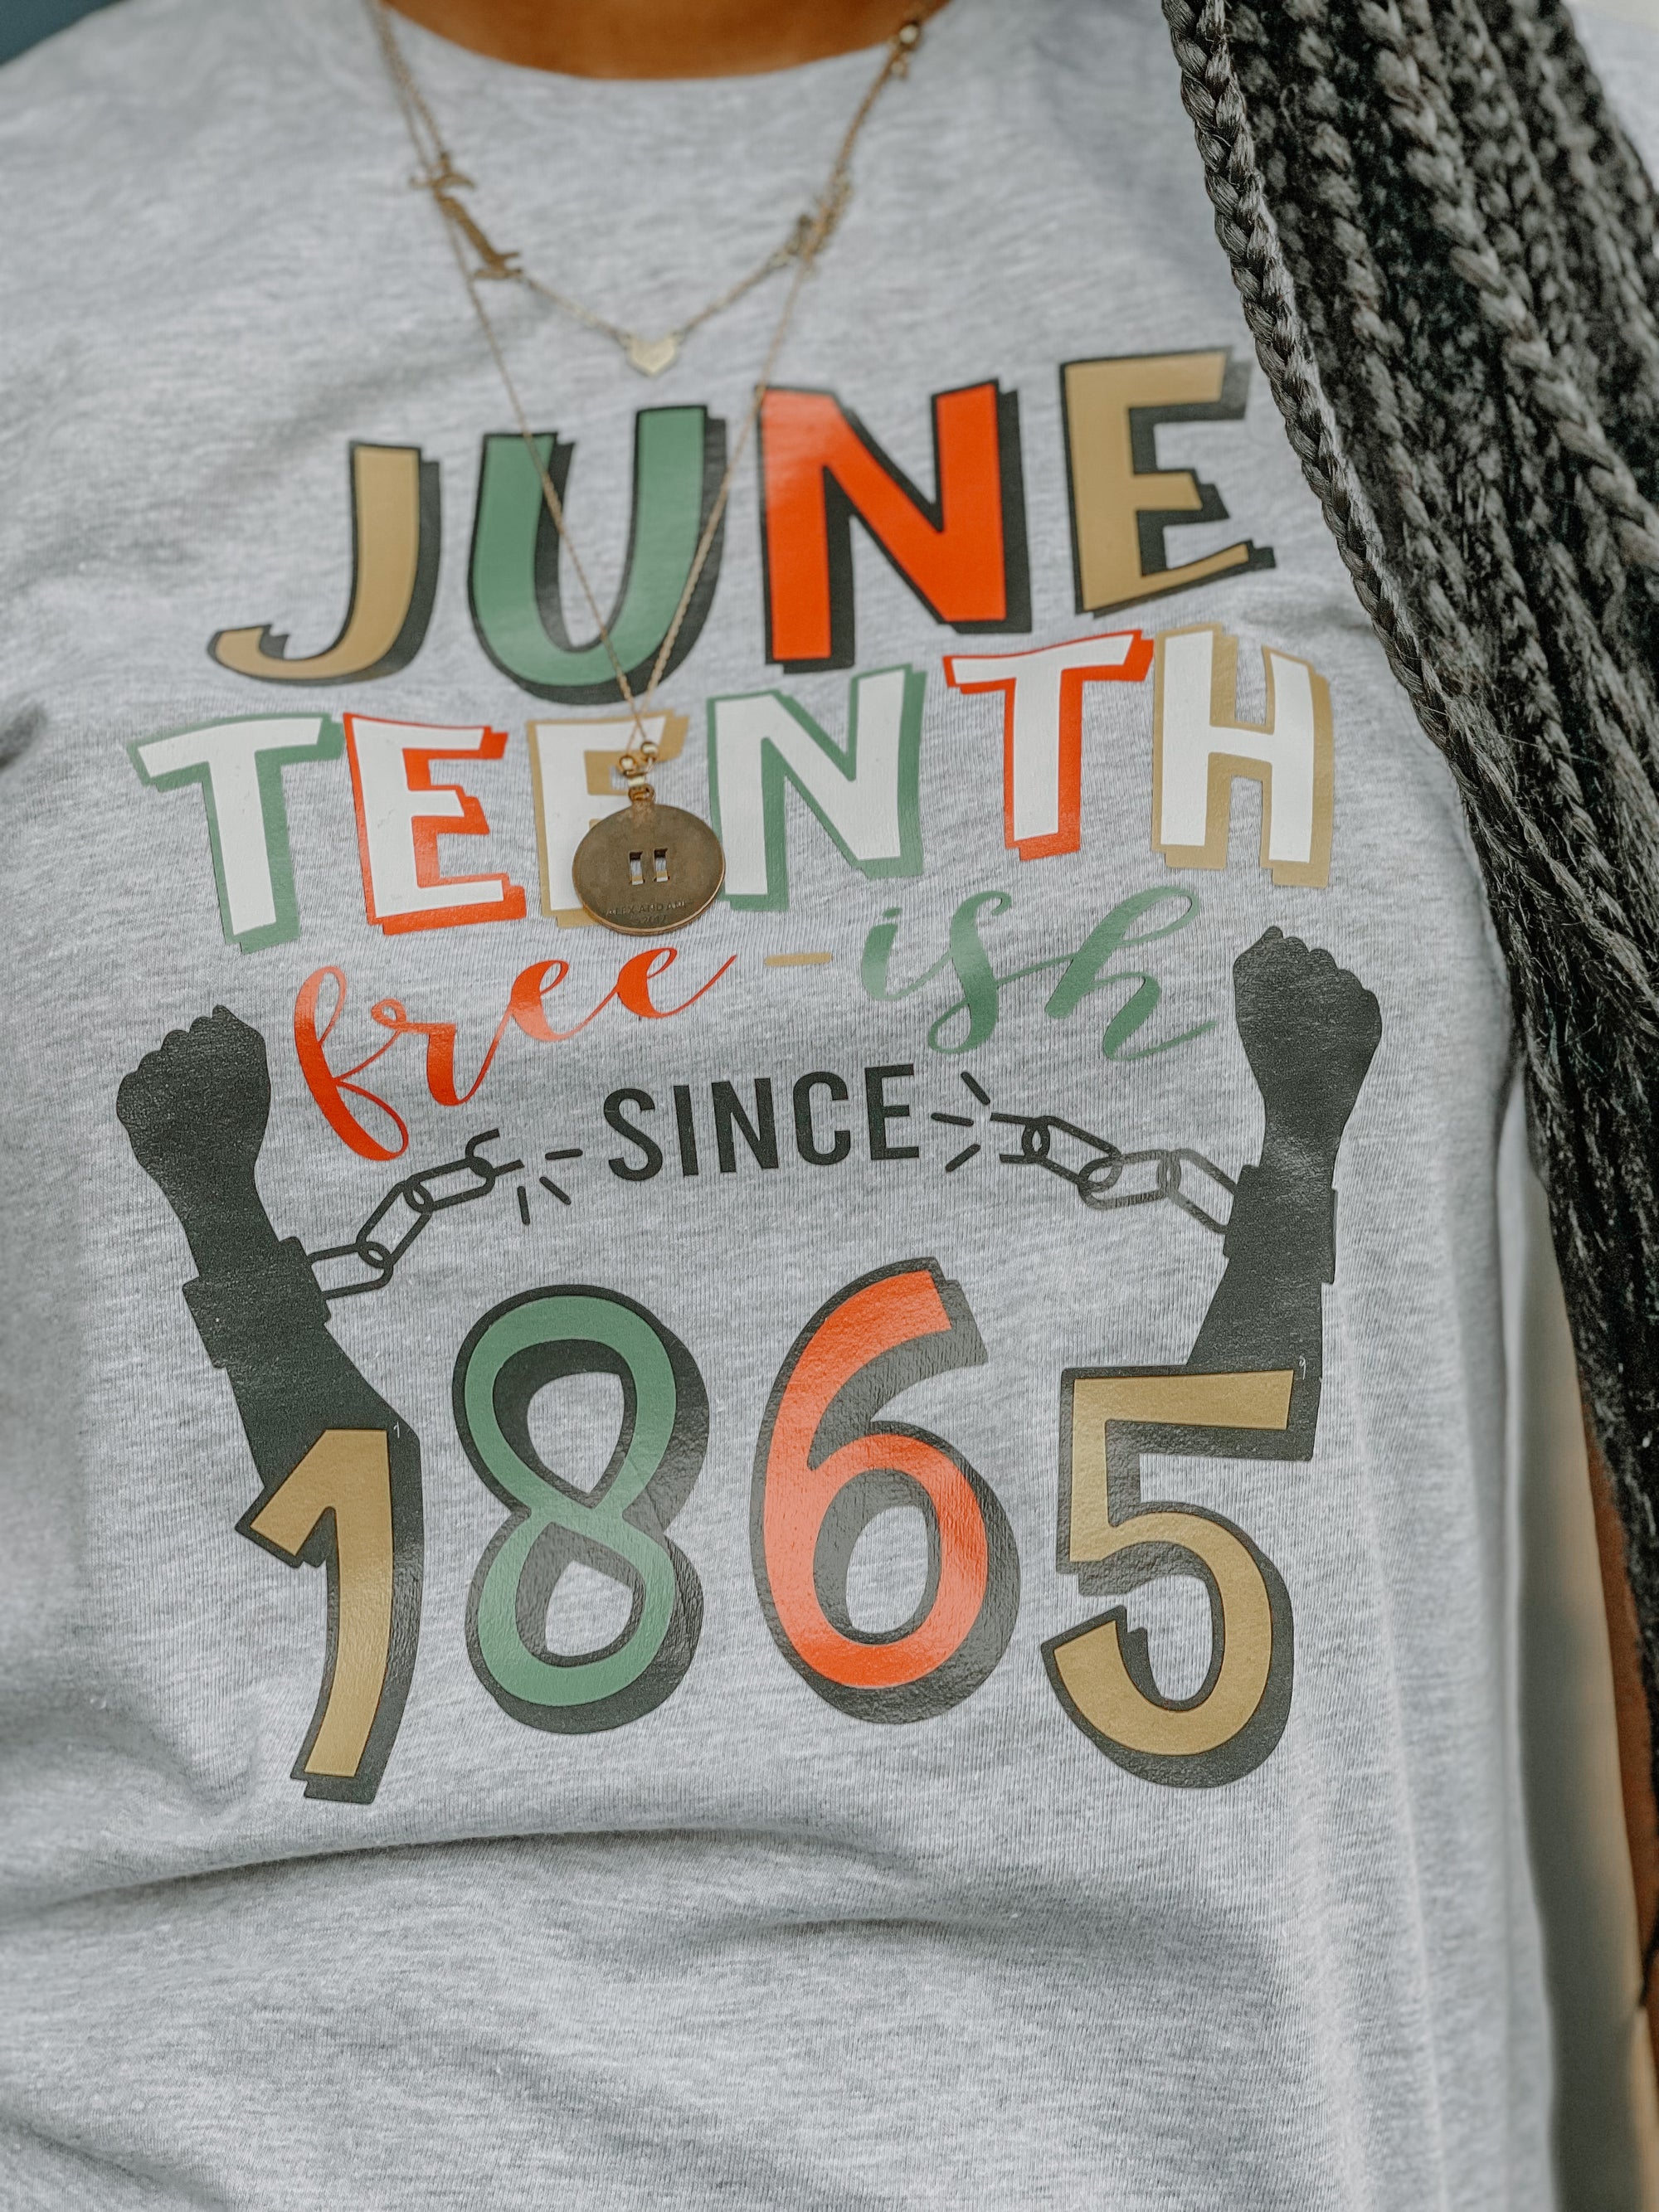 Juneteenth Free-ish Since 1865 Freedom Day Shirt for Adults in Gray